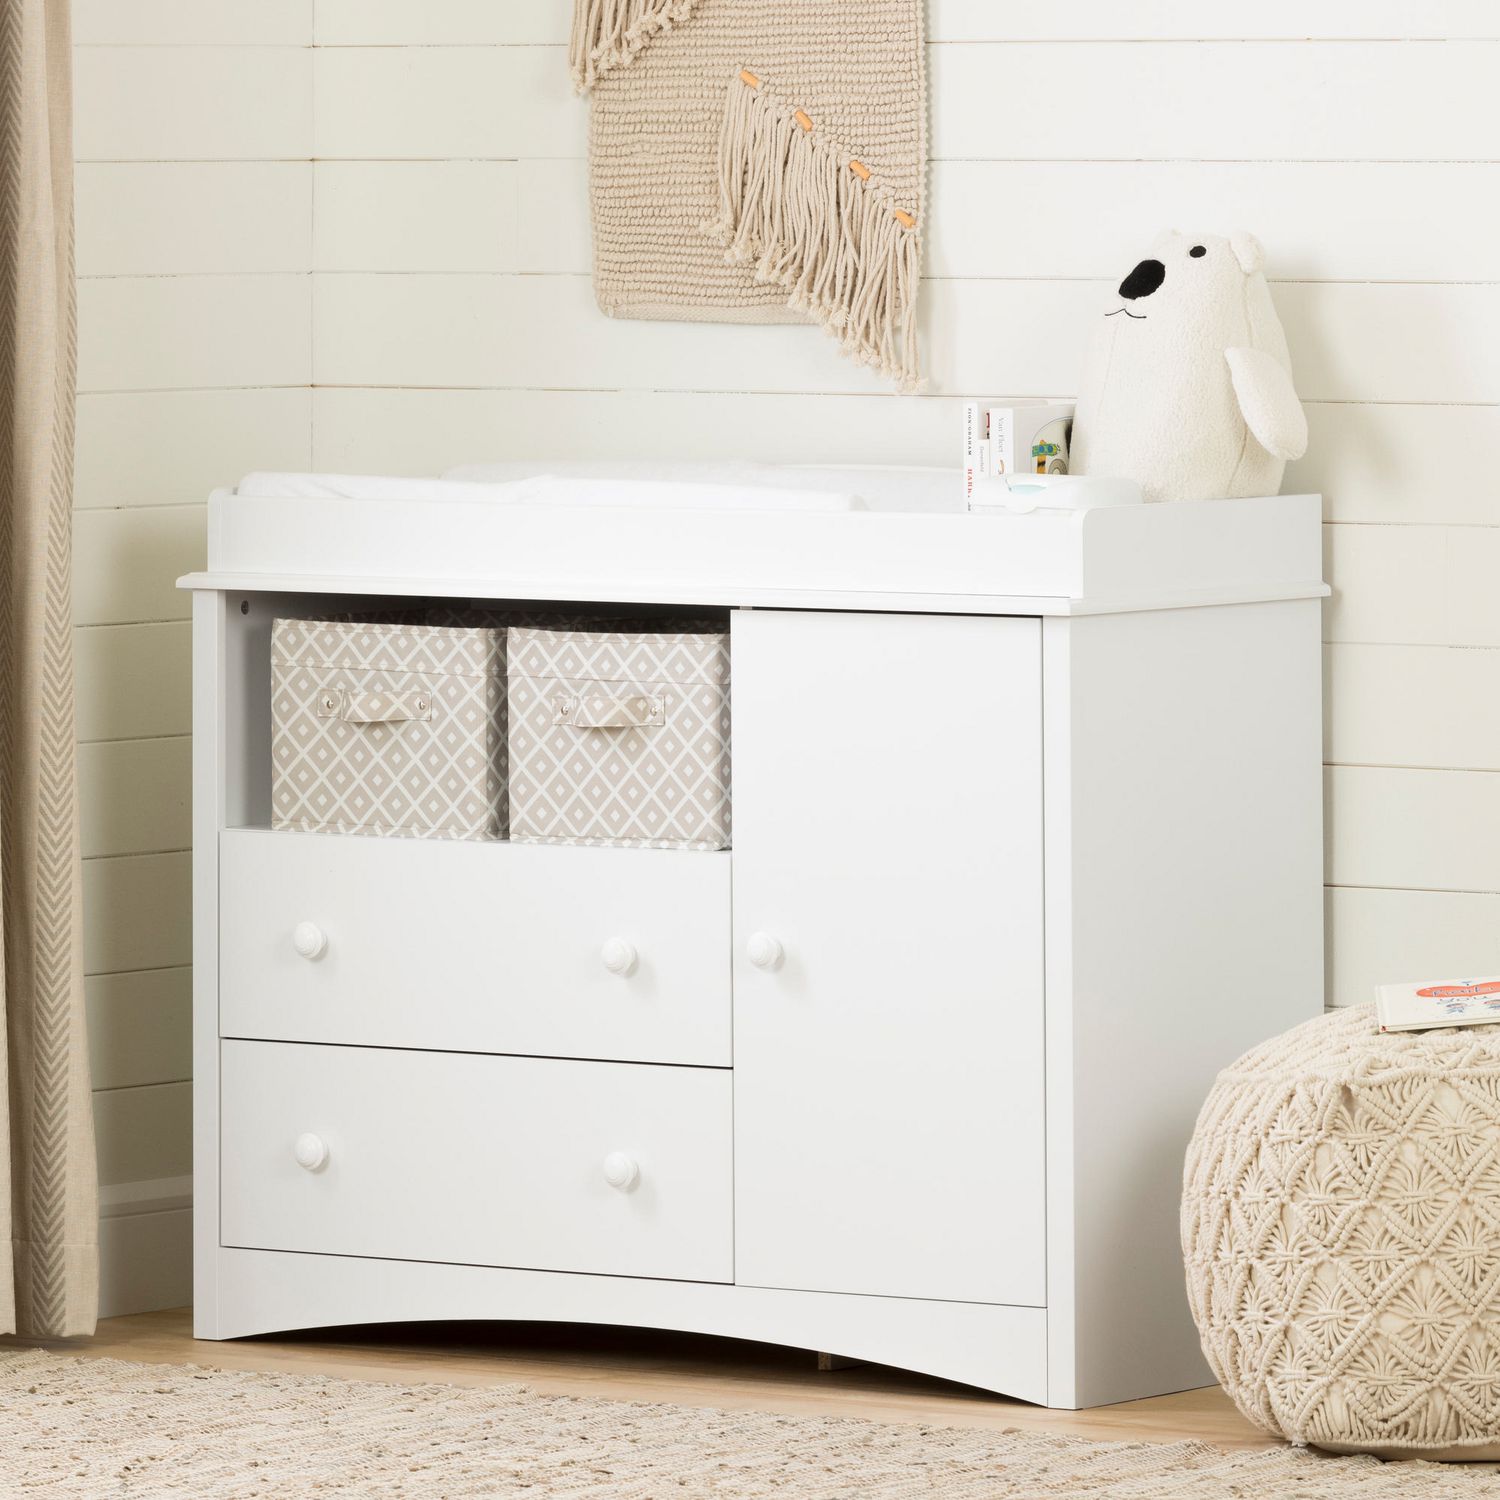 South Shore Peek A Boo Changing Table Pure White Walmart Canada